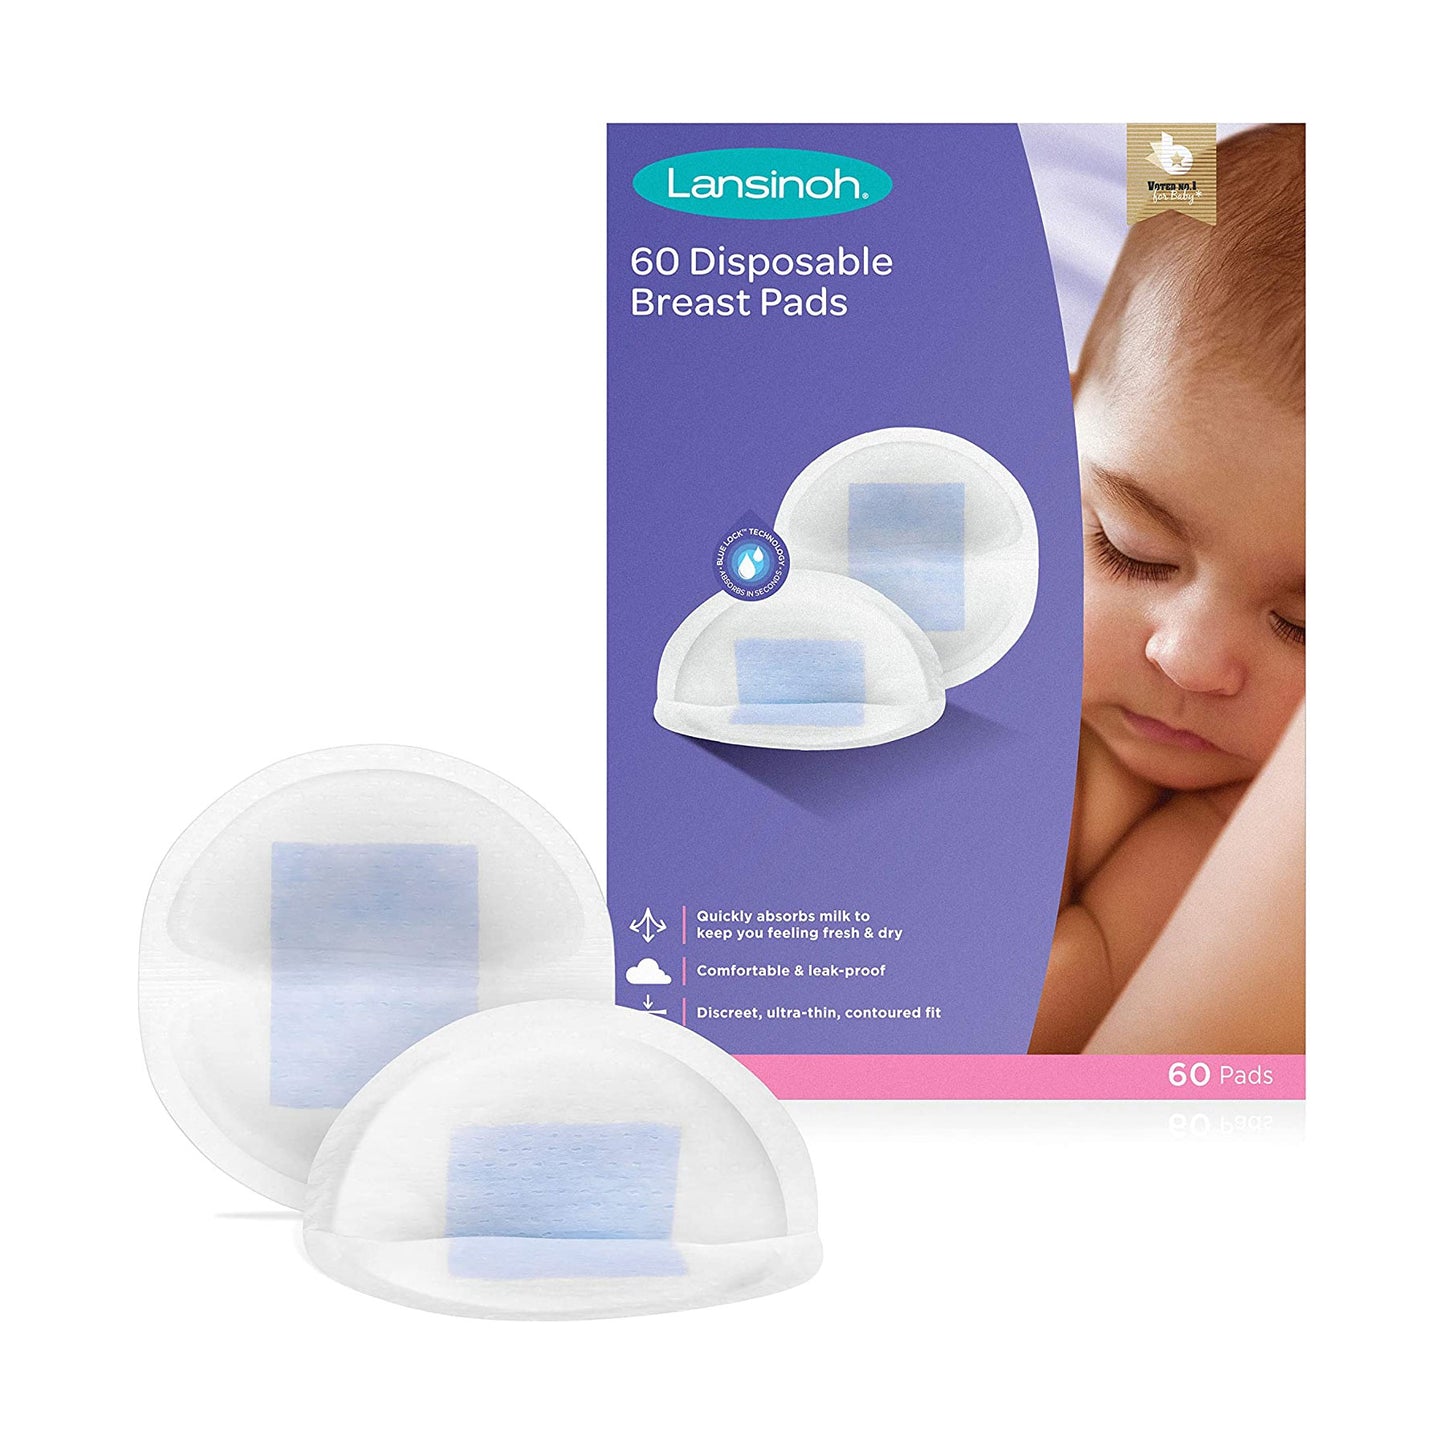 Lansinoh Disposable Breast Pads Pack of 60 for nursing breastfeeding mothers